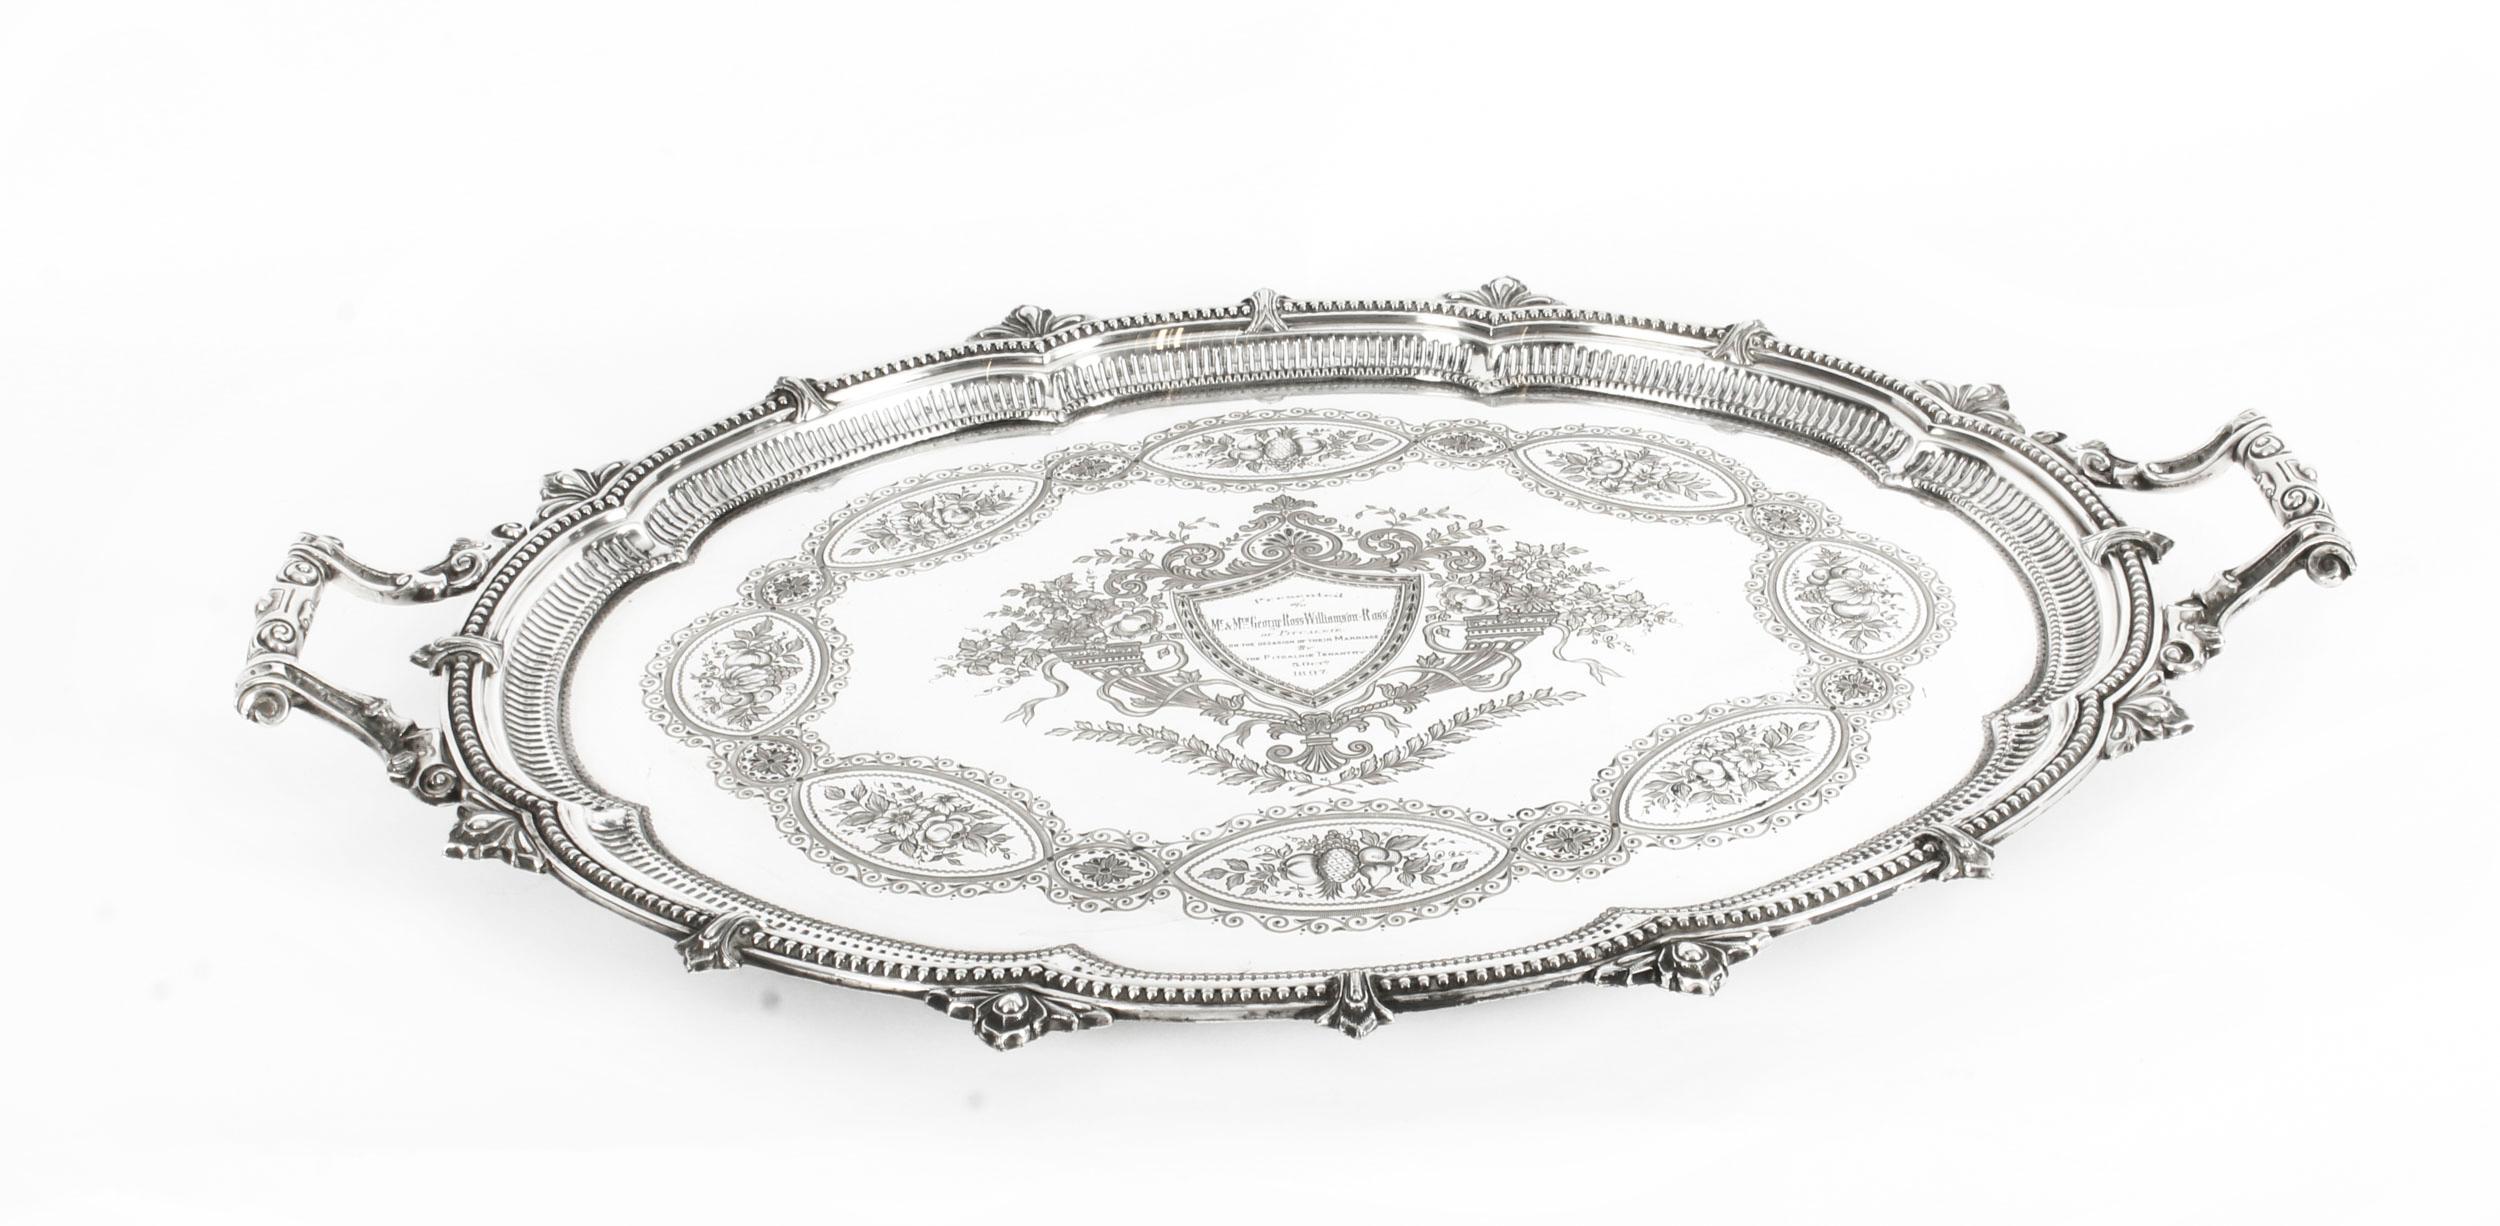 This is a magnificent antique English Victorian oval silver plated twin handled tray by the highly sought after silversmiths Mappin & Webb, Sheffield, circa 1880 in date.
 
This splendid tray features beautifully engraved and embossed foliate and